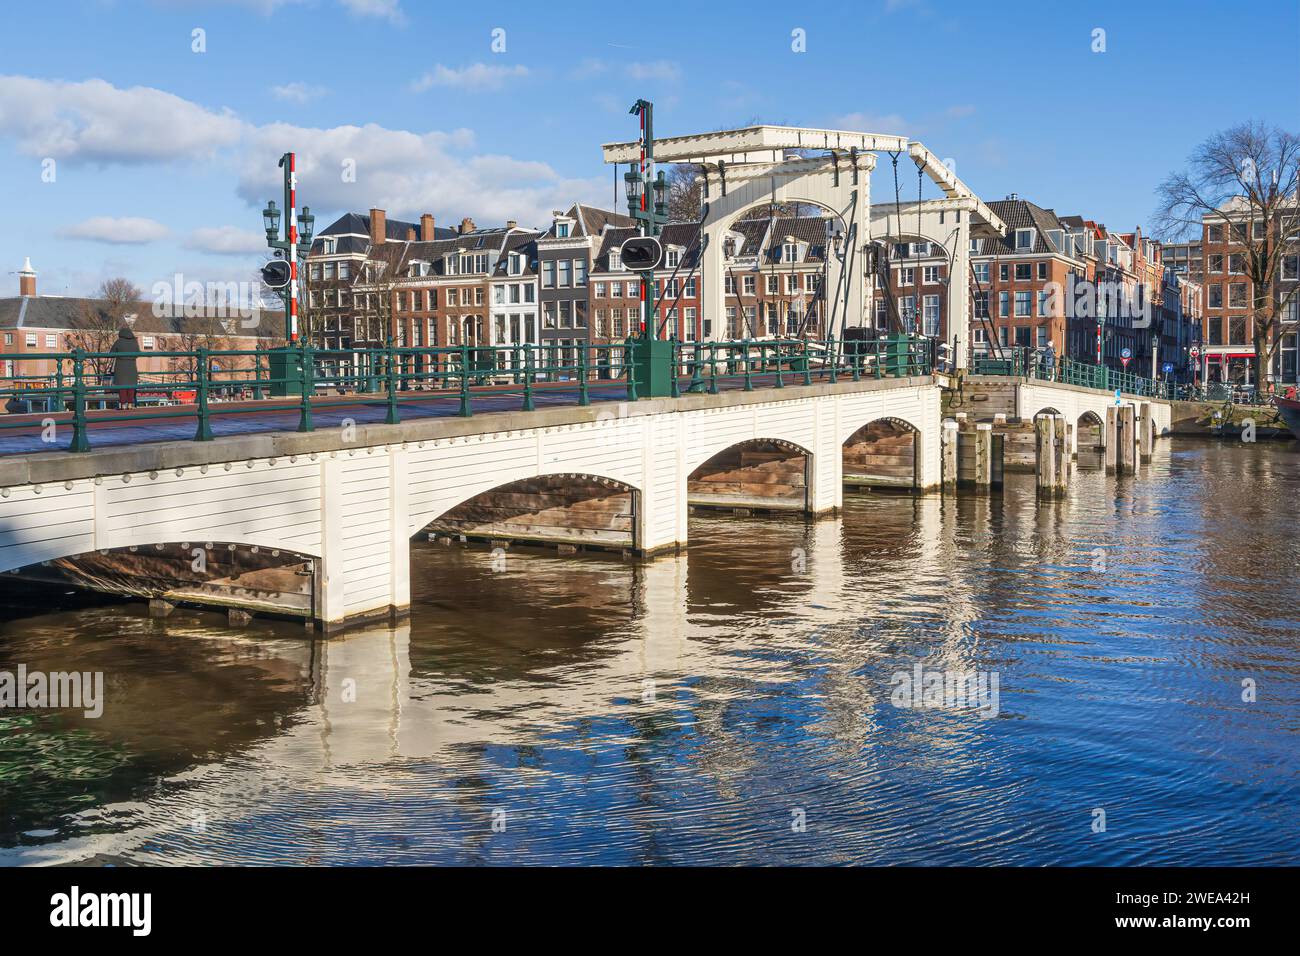 Magere Brug or Skinny Bridge across the Amstel river in Amsterdam the Netherlands Stock Photo